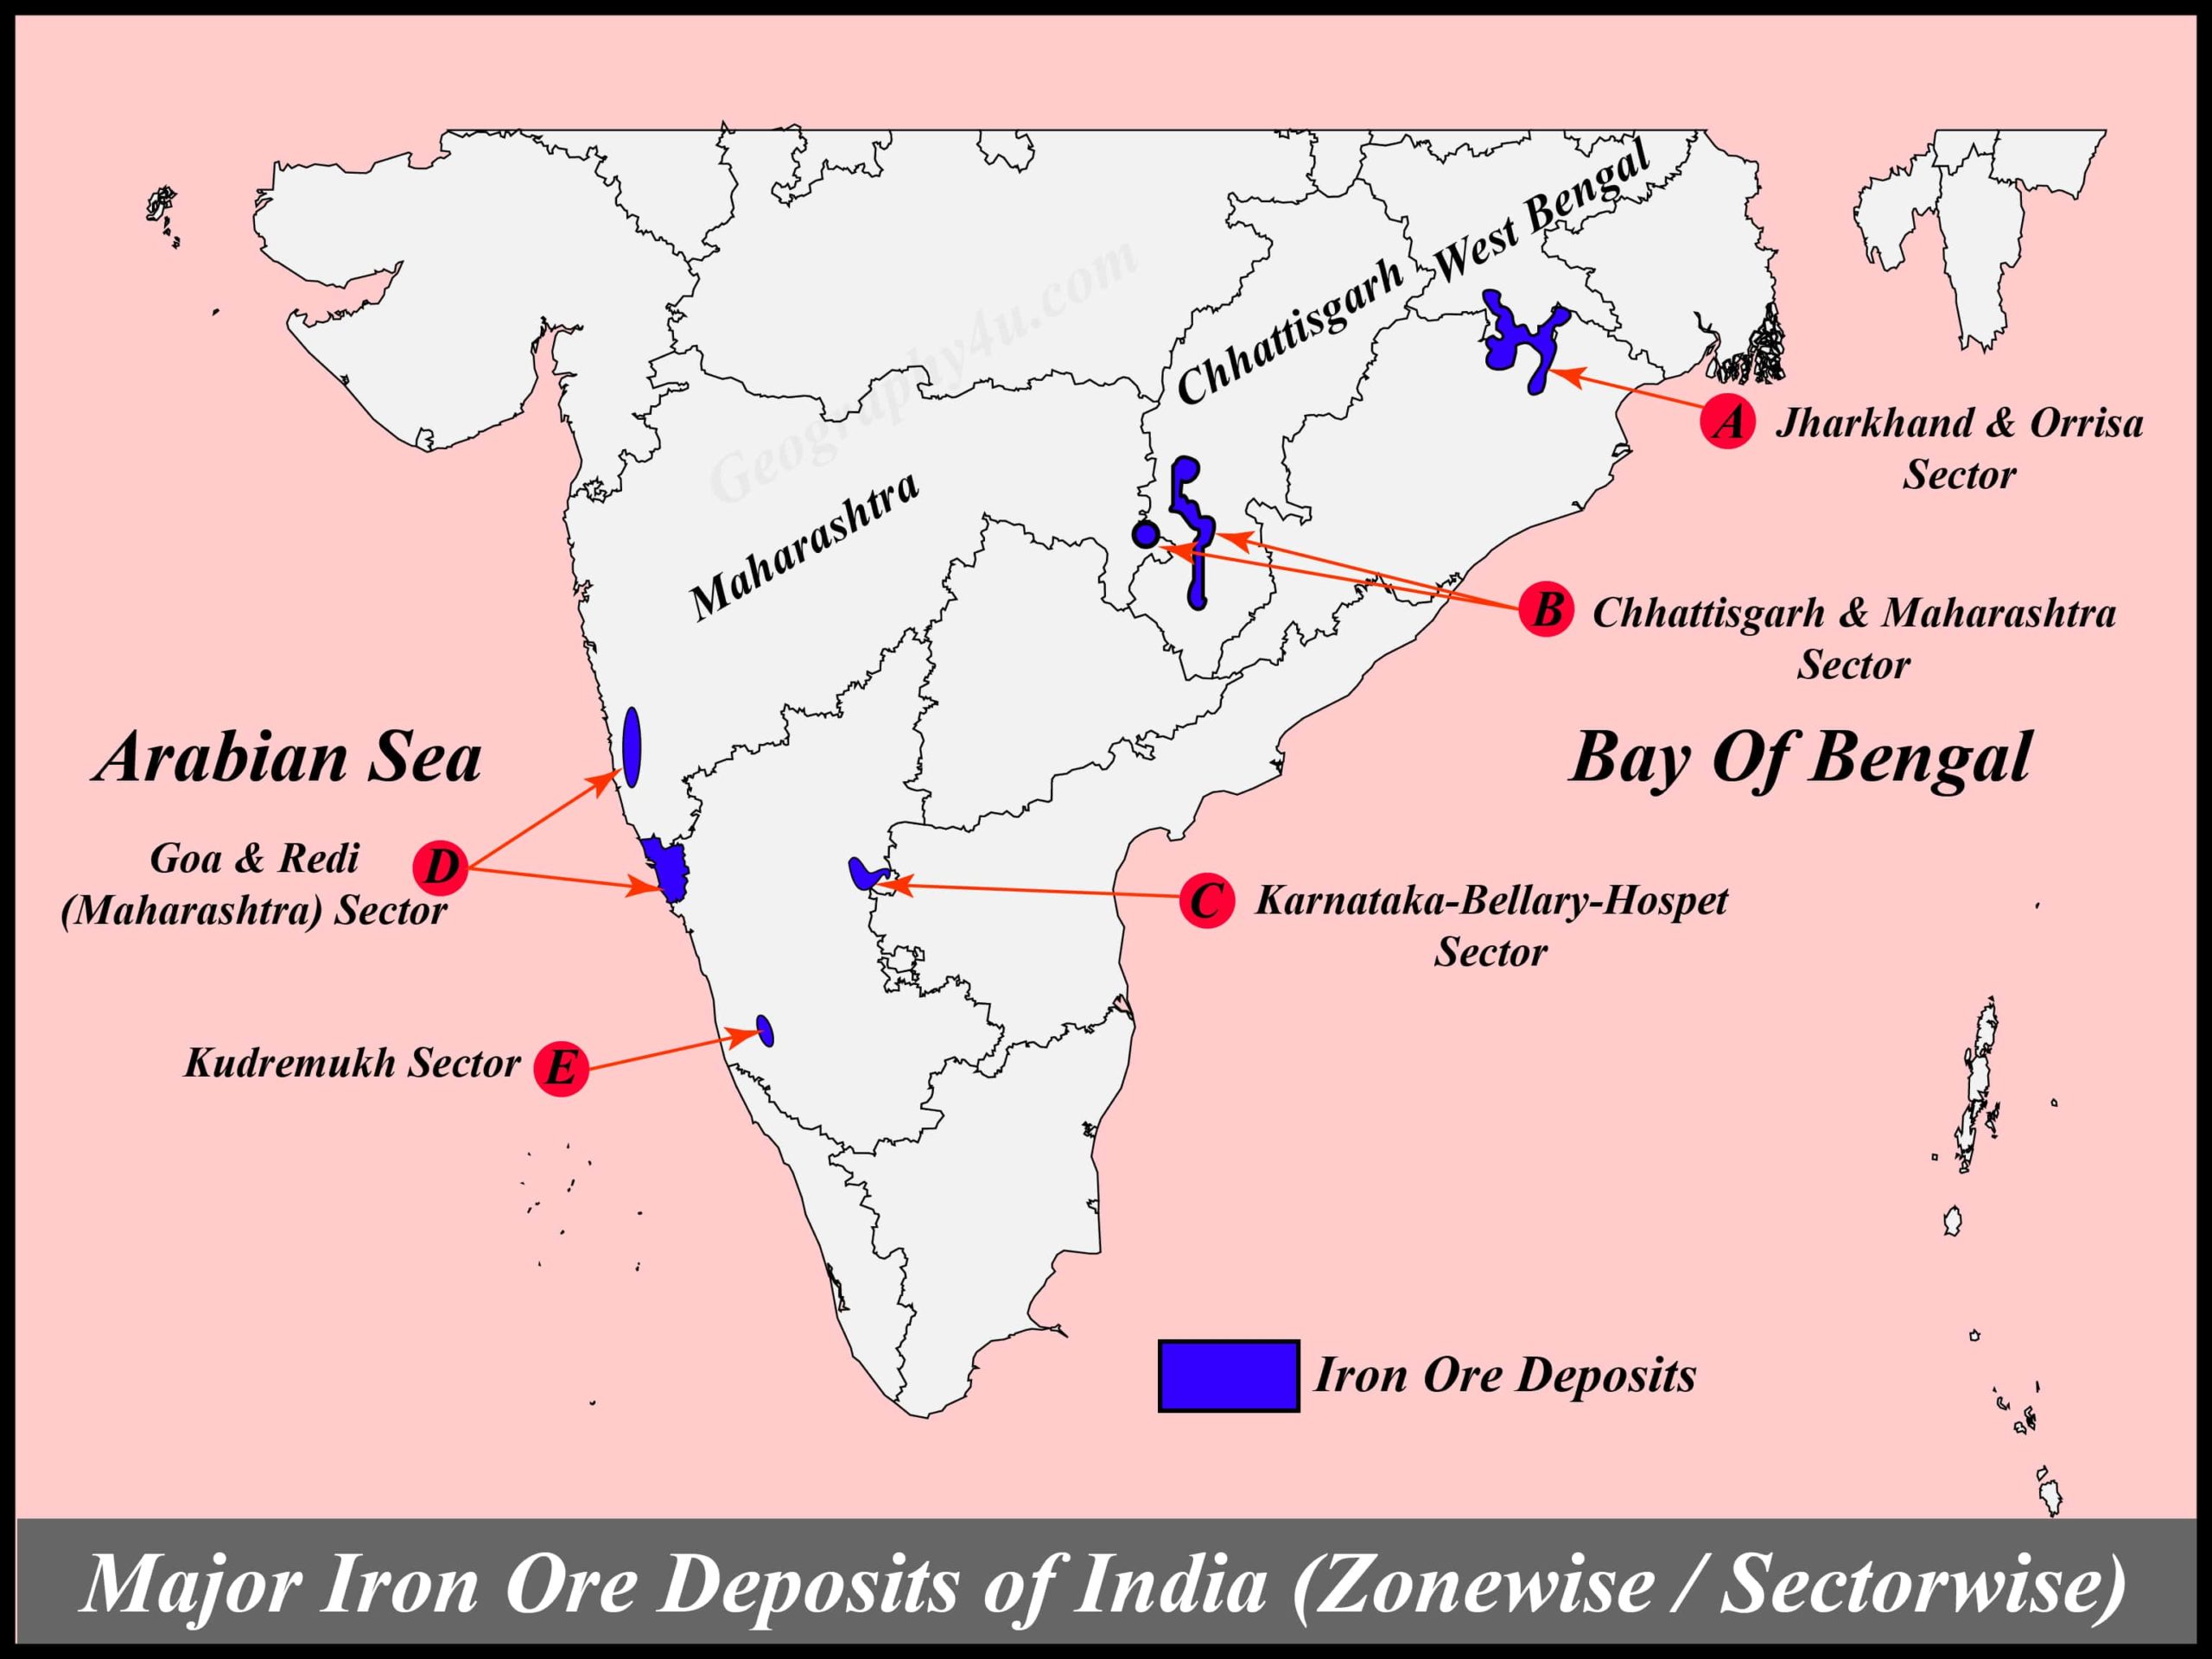 case study on mineral resources in india